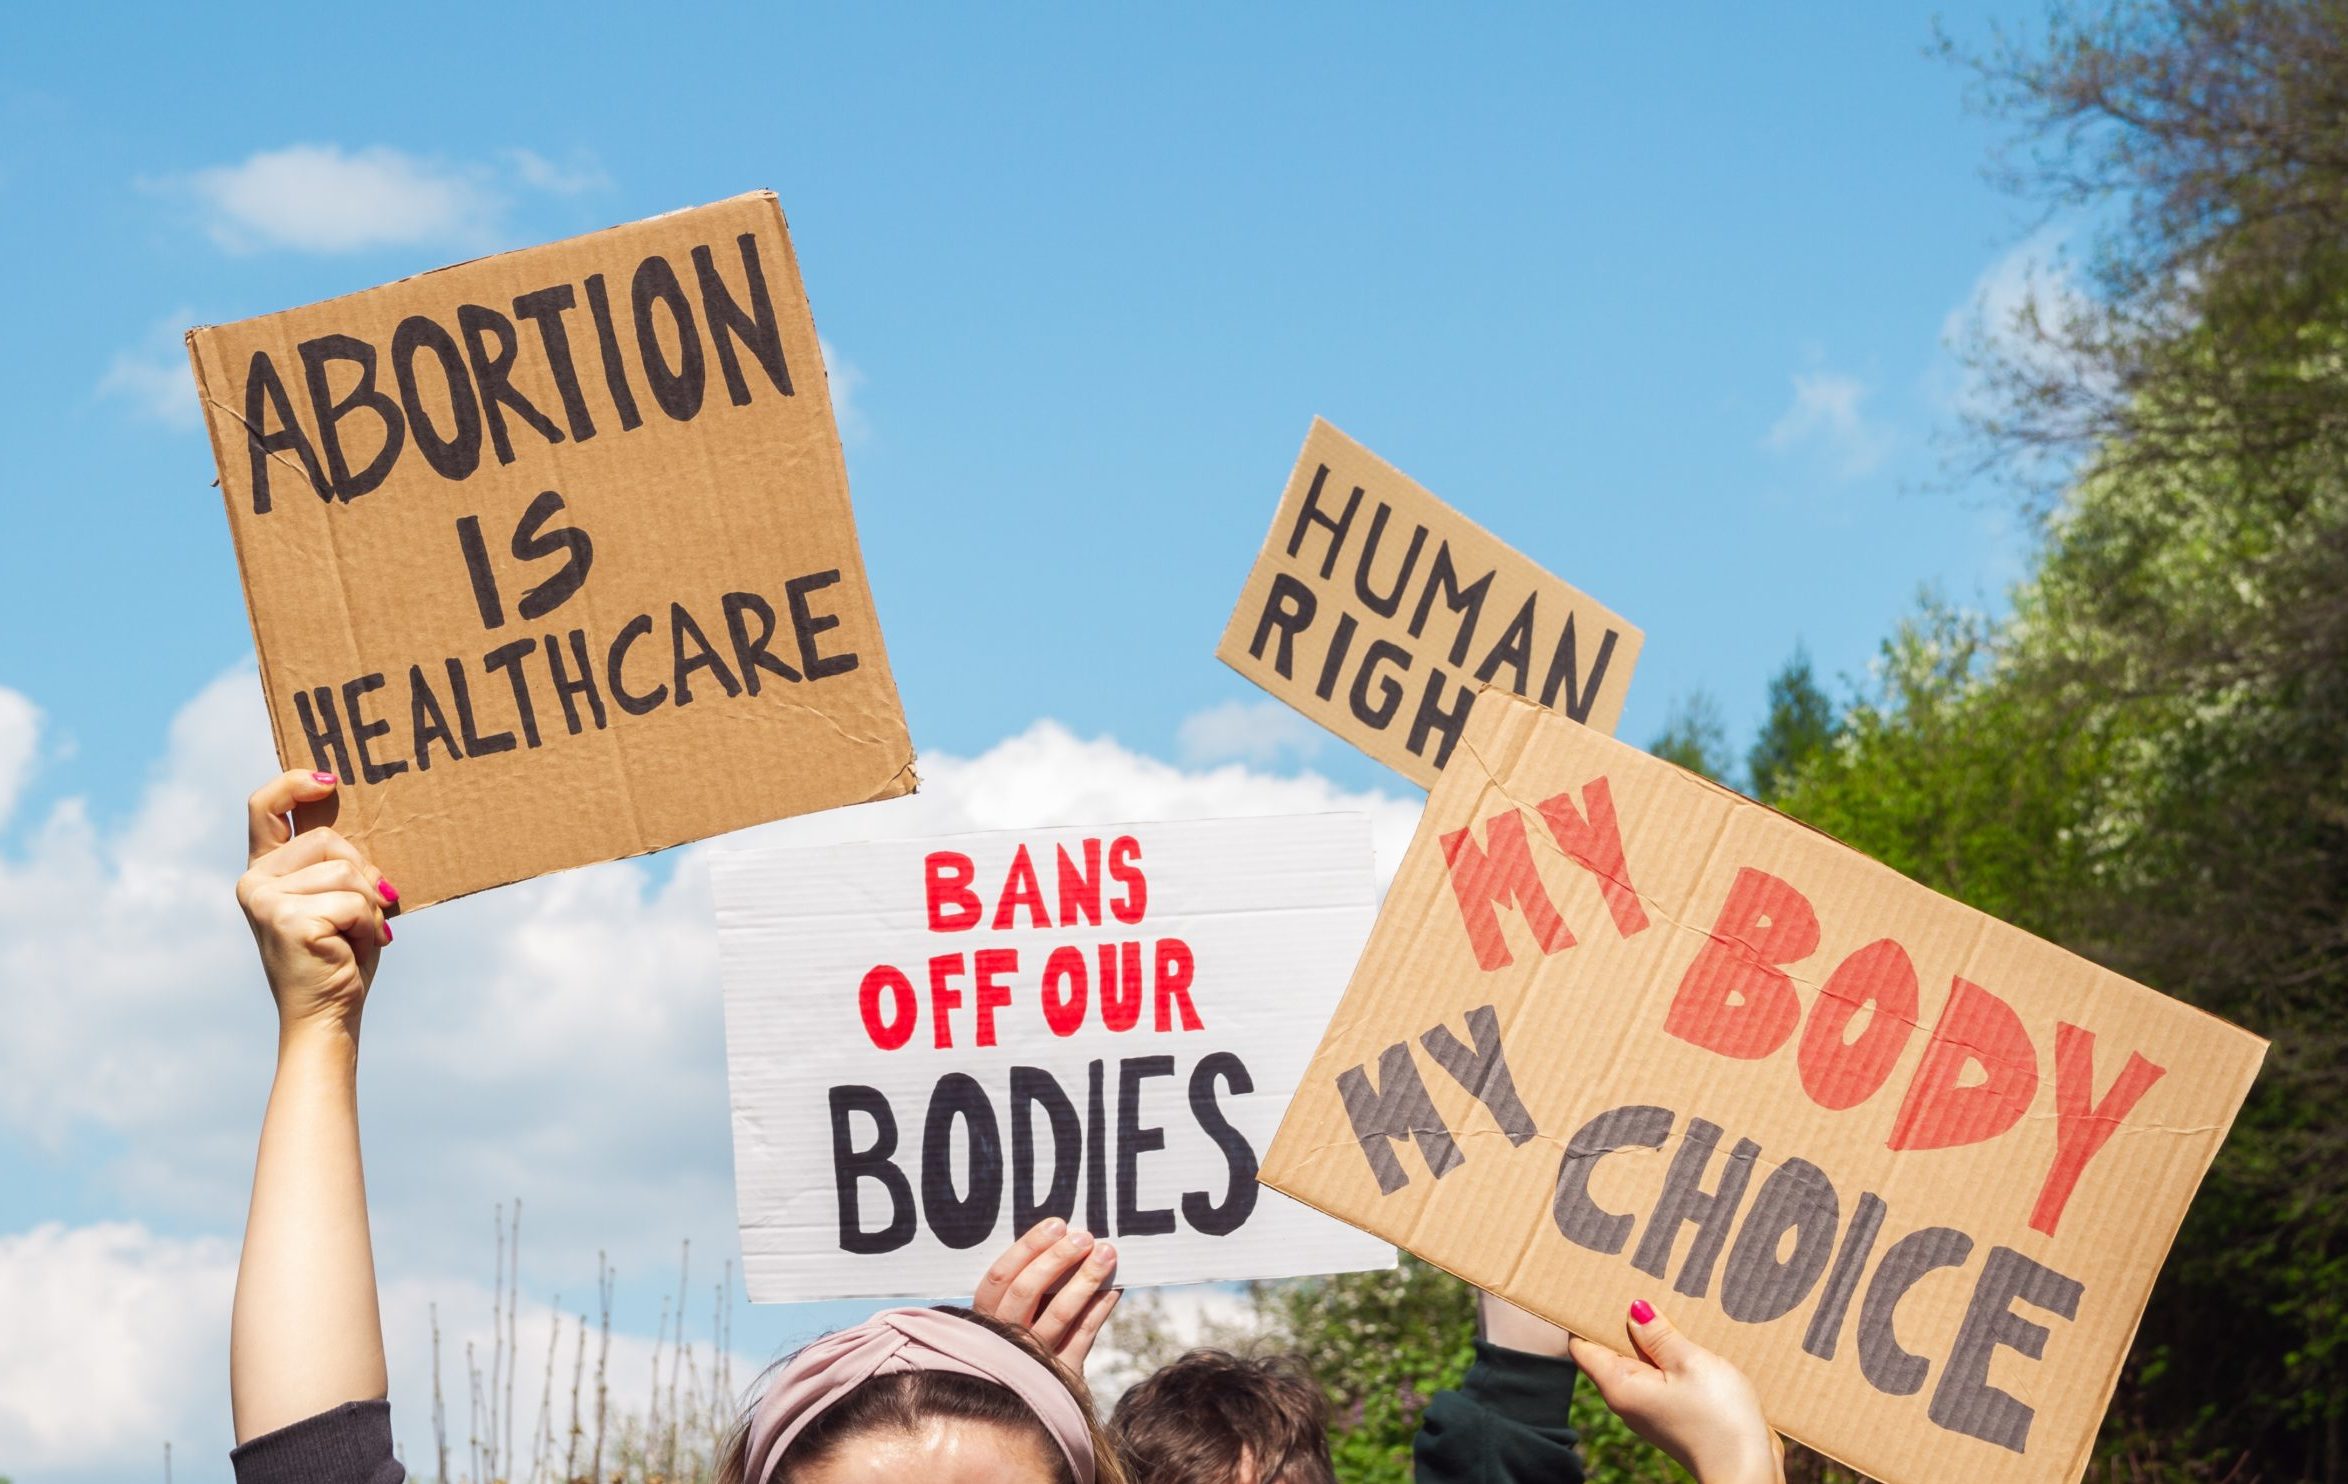 Can Trump Successfully Navigate an Abortion Middle Ground?